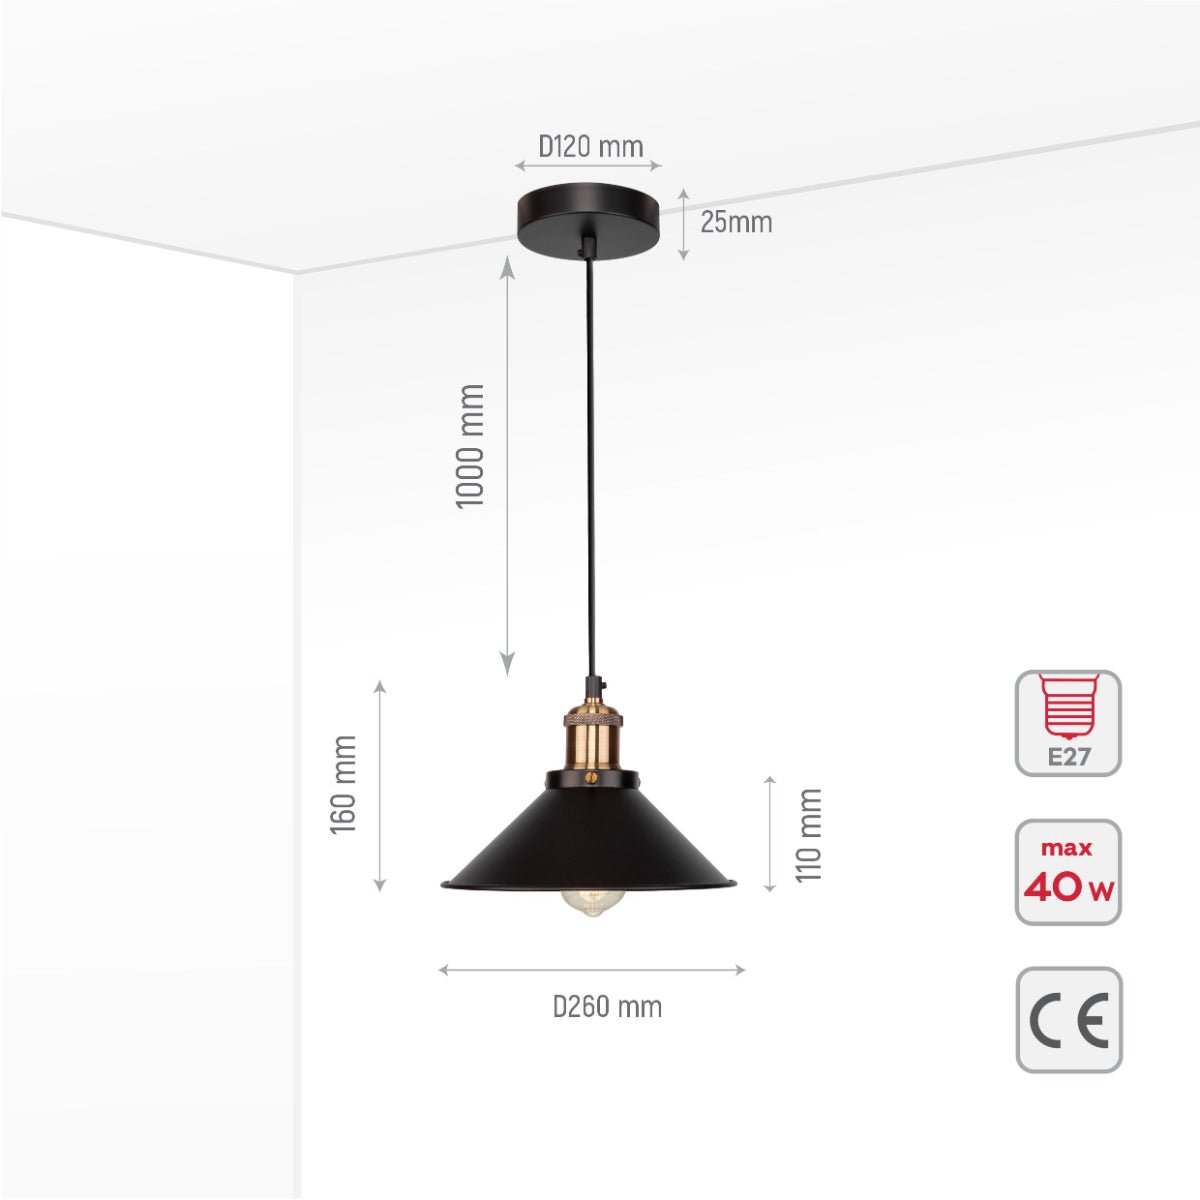 Size and specs of Black Metal Large Funnel Pendant Ceiling Light with E27 | TEKLED 150-15032